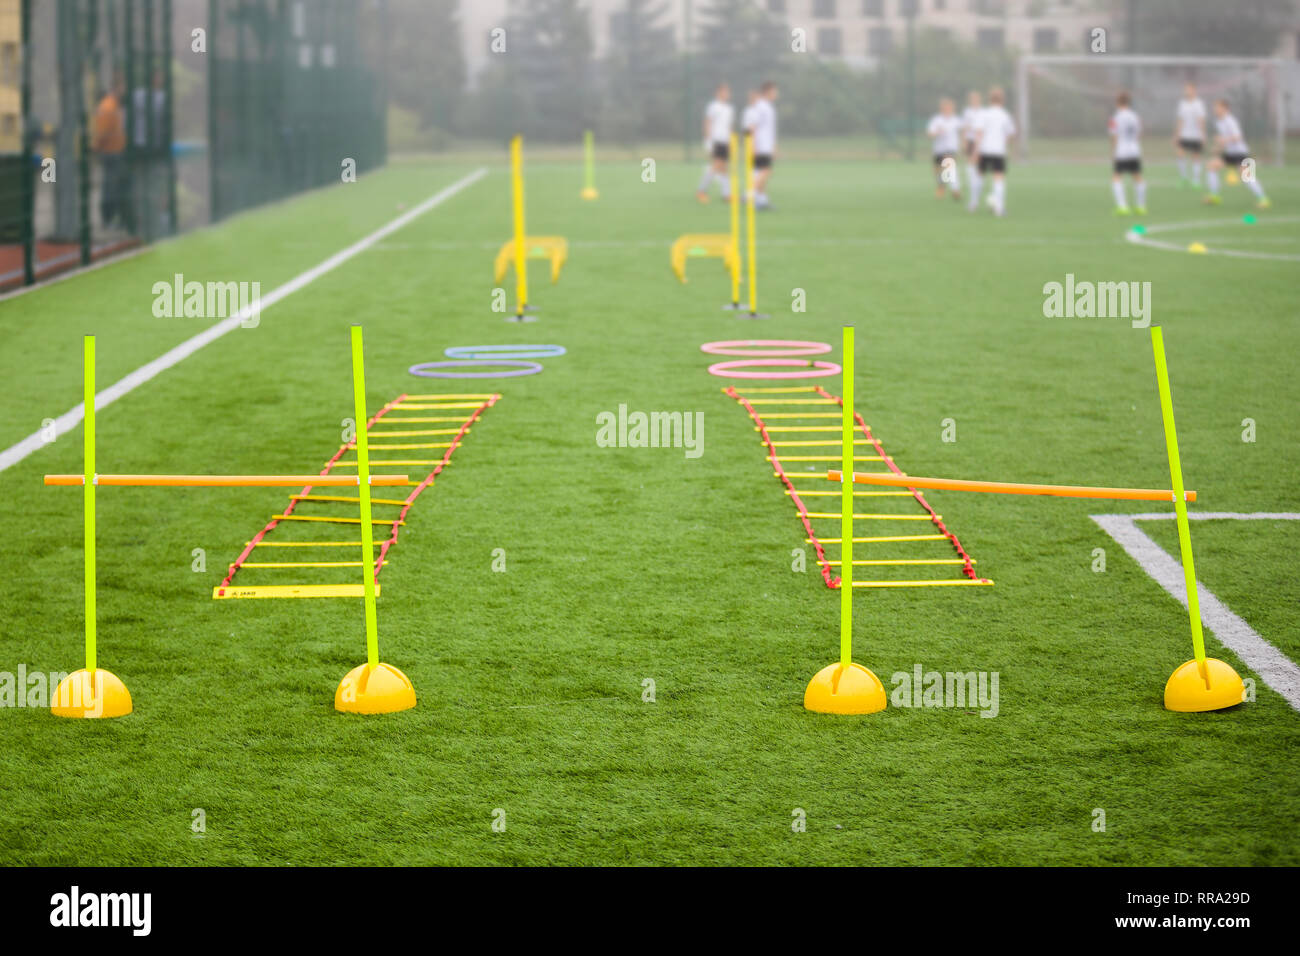 Football Training Equipment High Resolution Stock Photography And Images Alamy